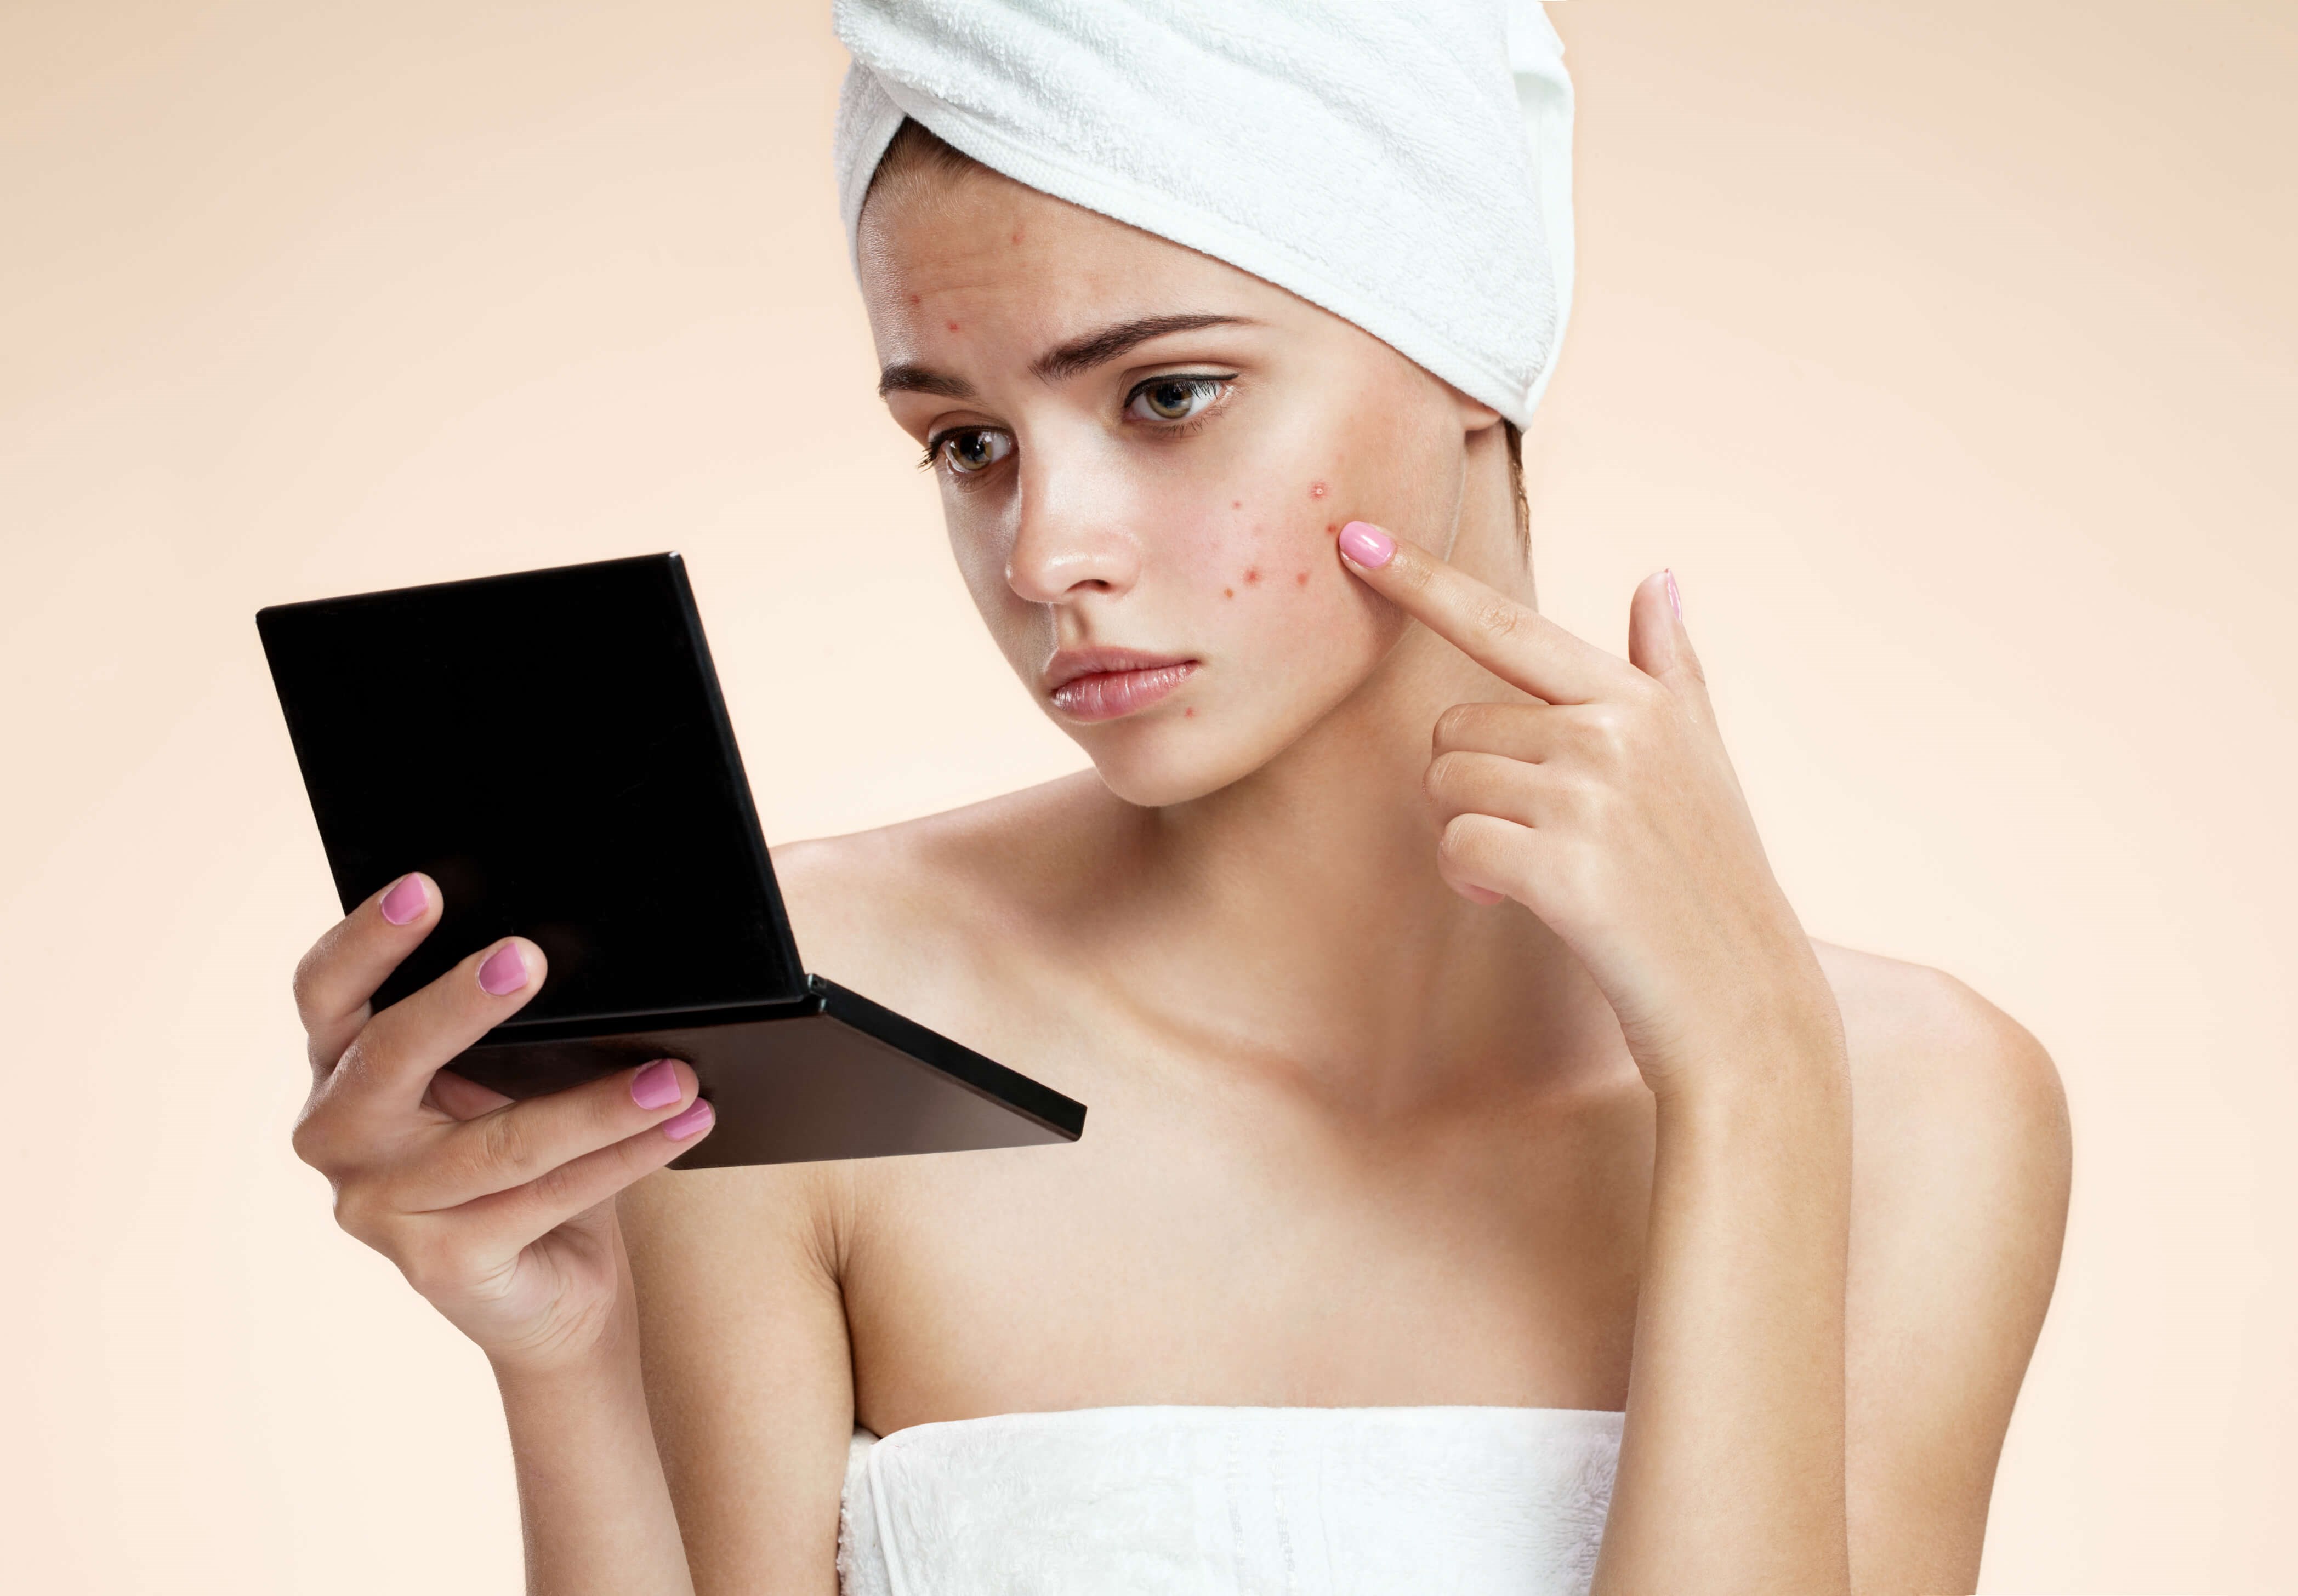 Can Fibroblasting Get Rid of Acne Scars?